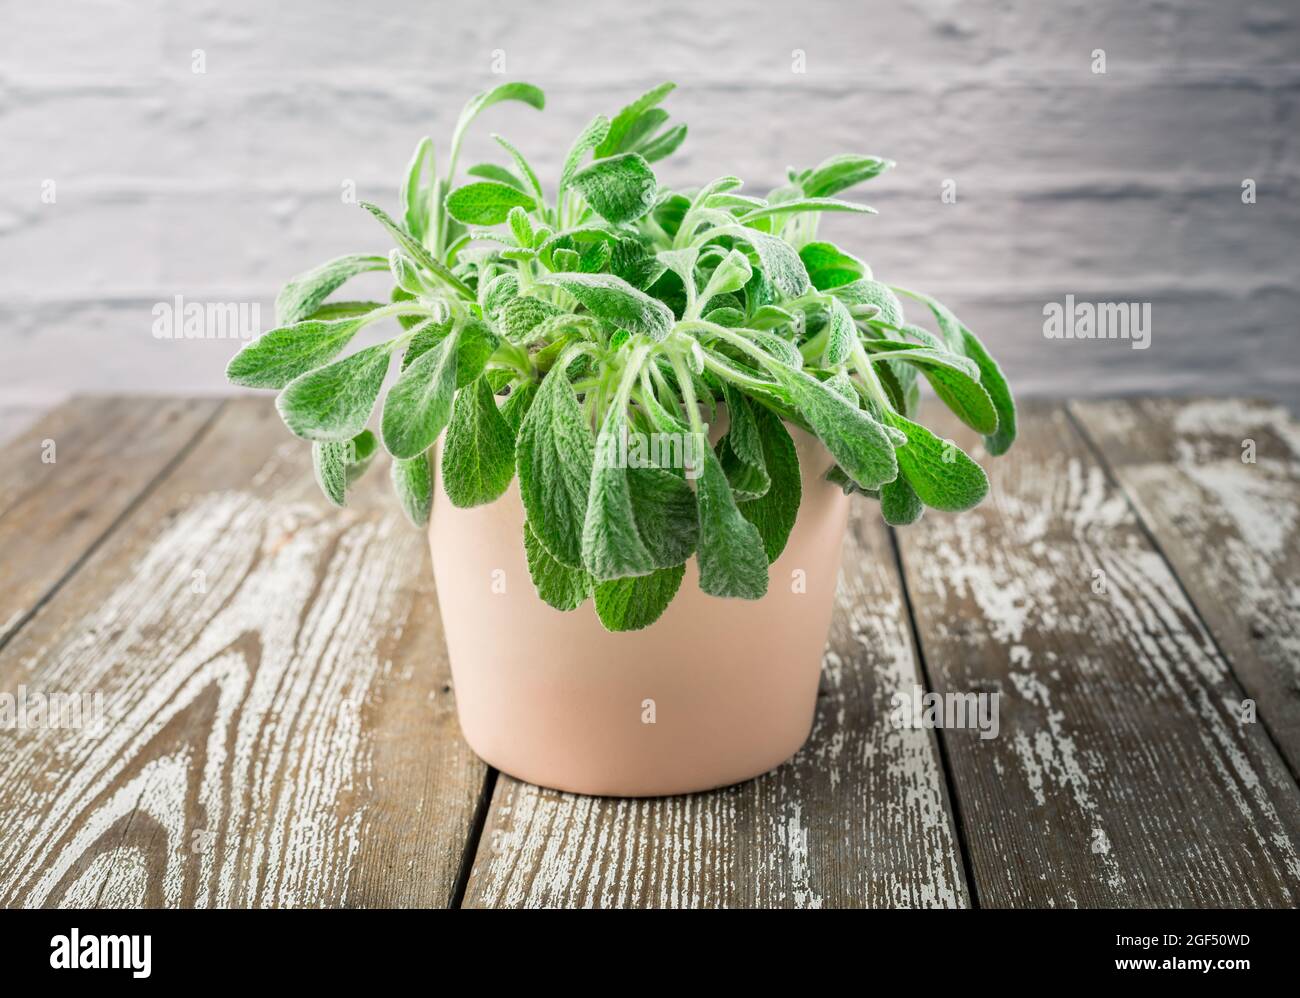 Sideritis clandestina in a pot - Sideritis known as mountain tea used in herbal medicine as herbal tea plant Stock Photo